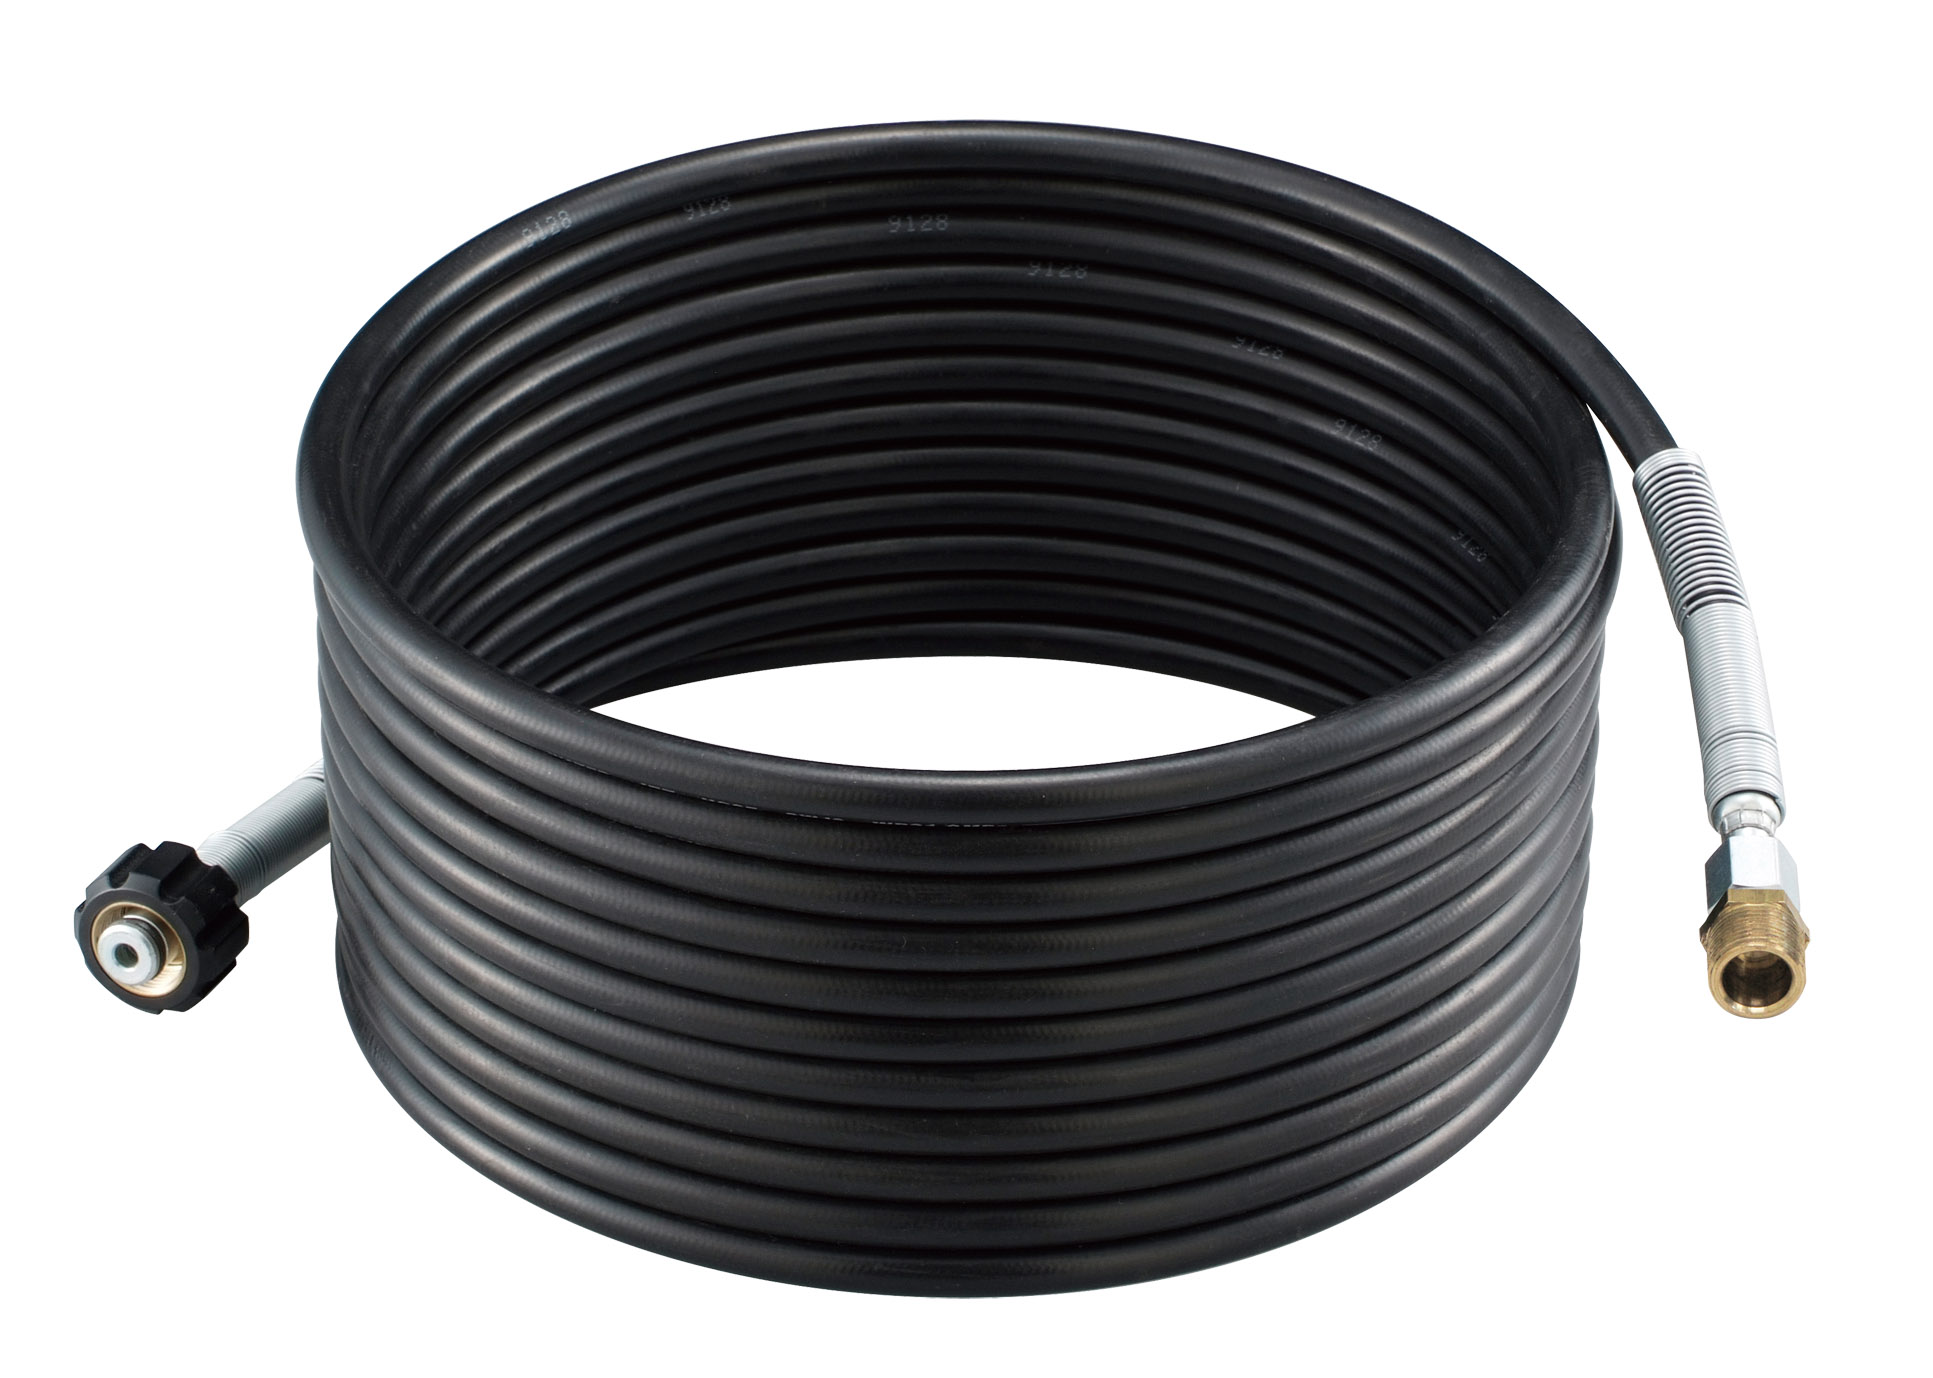 Extension High Pressure Hose (10 m) Professional Specification for High Pressure Cleaner